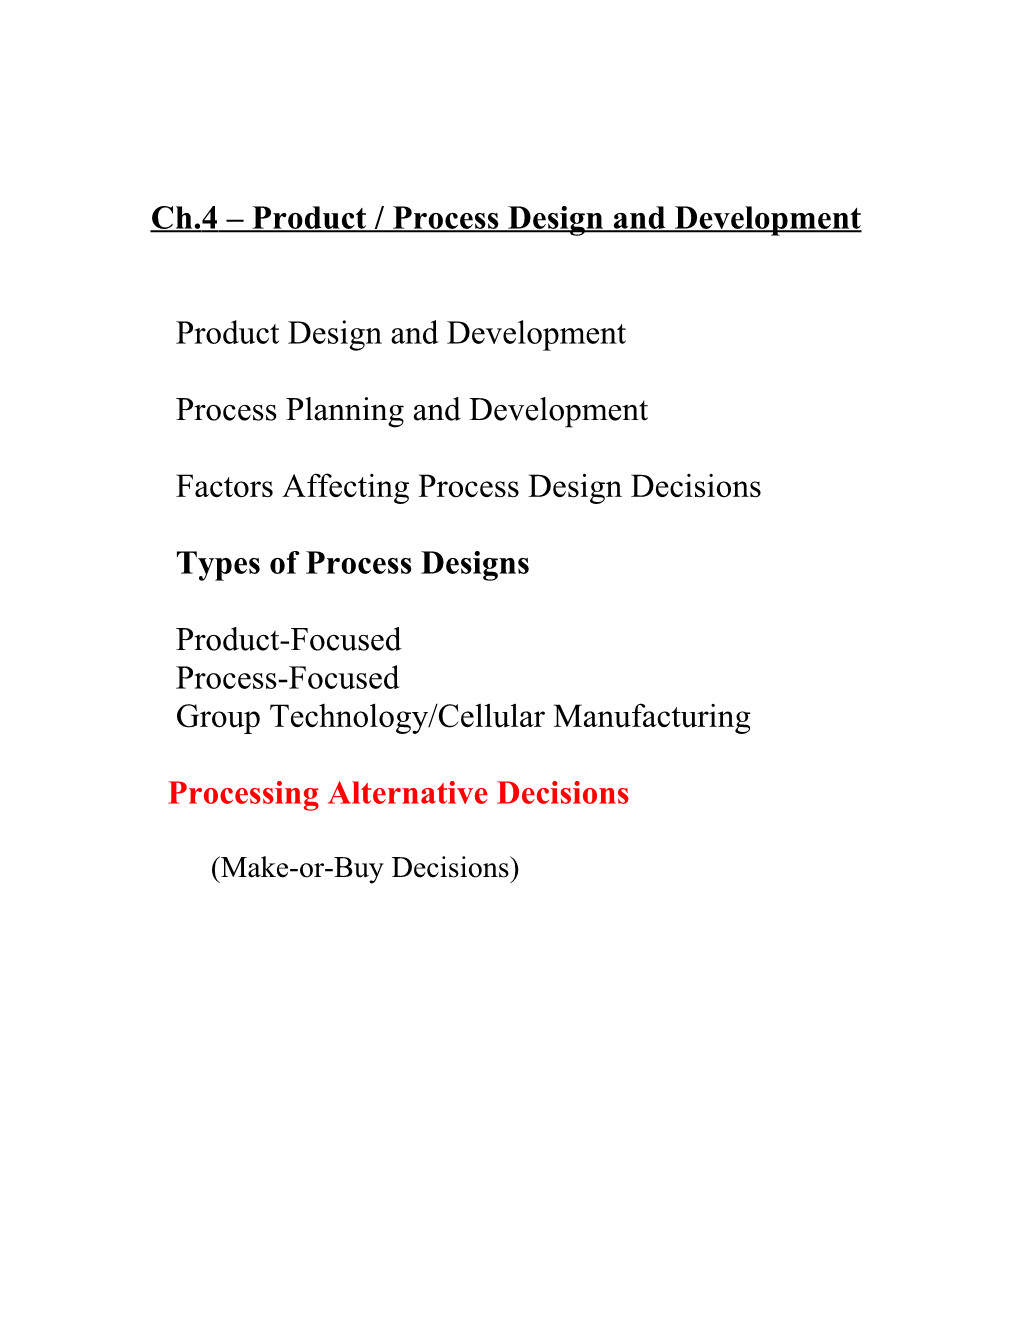 Ch.4 Product / Process Design and Development